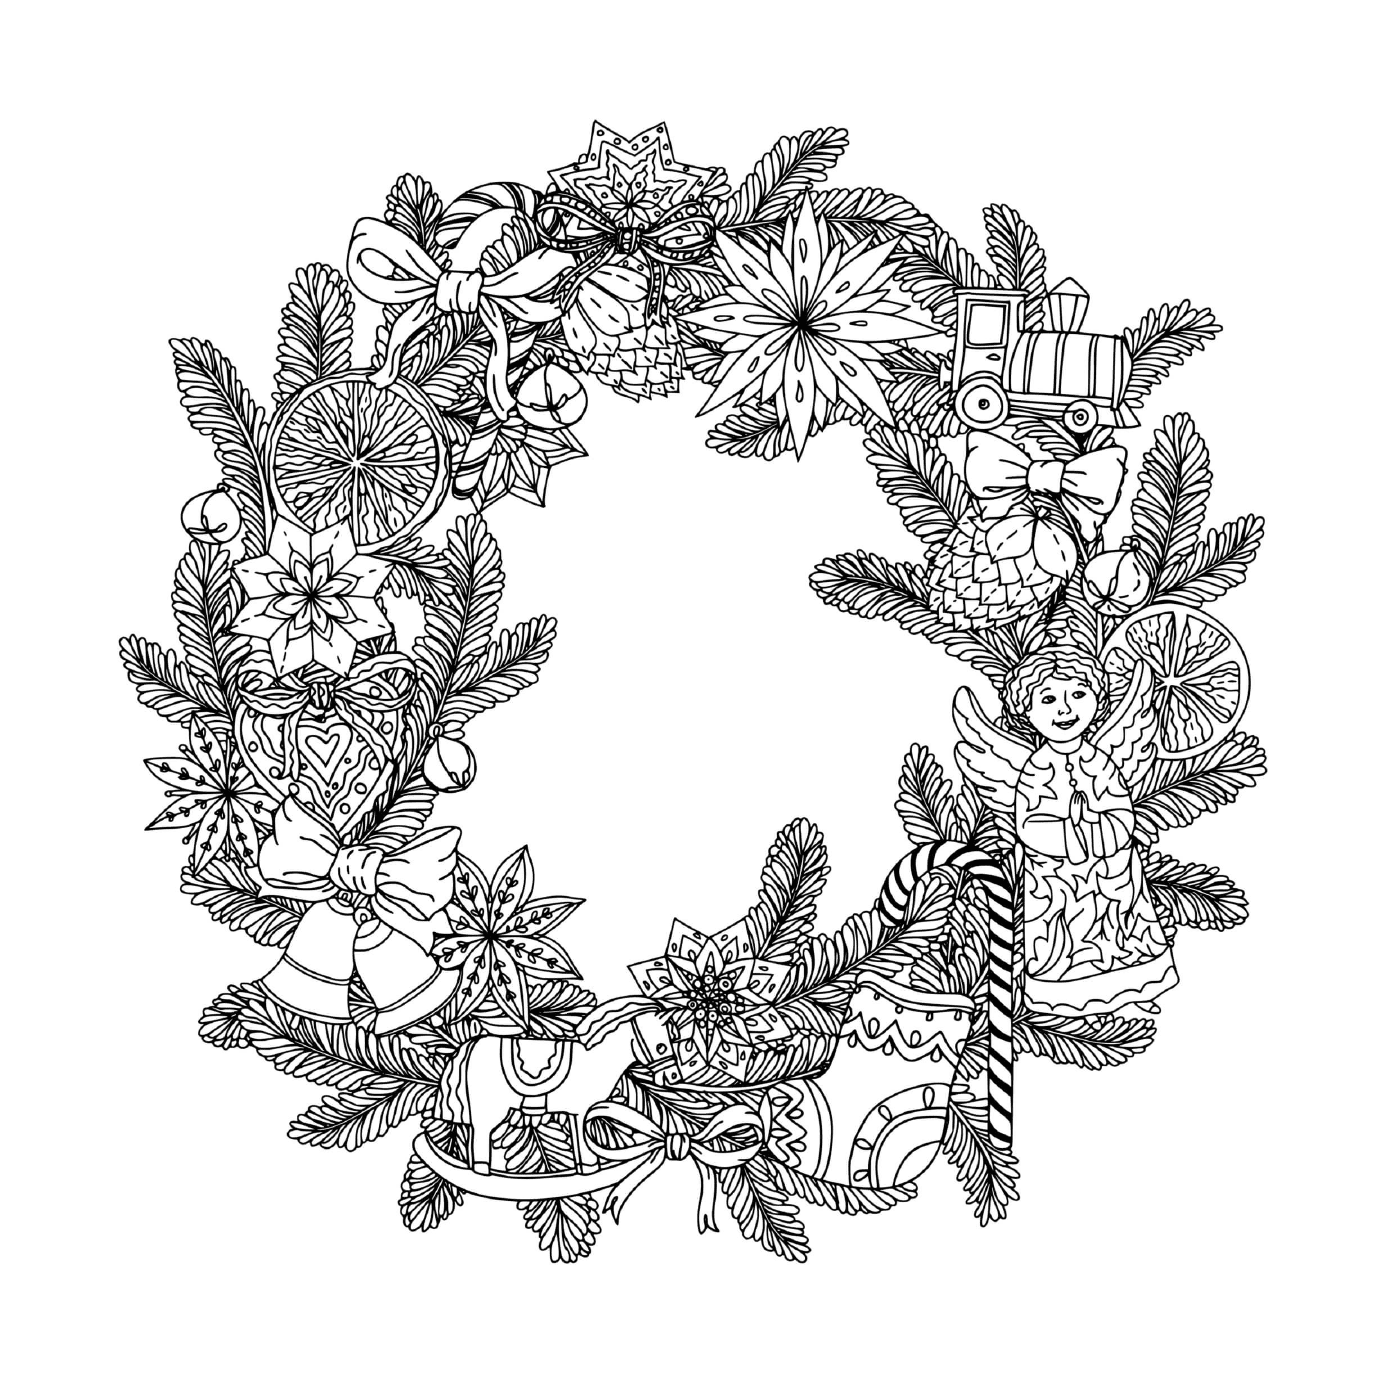  A Christmas crown in Zentangle 